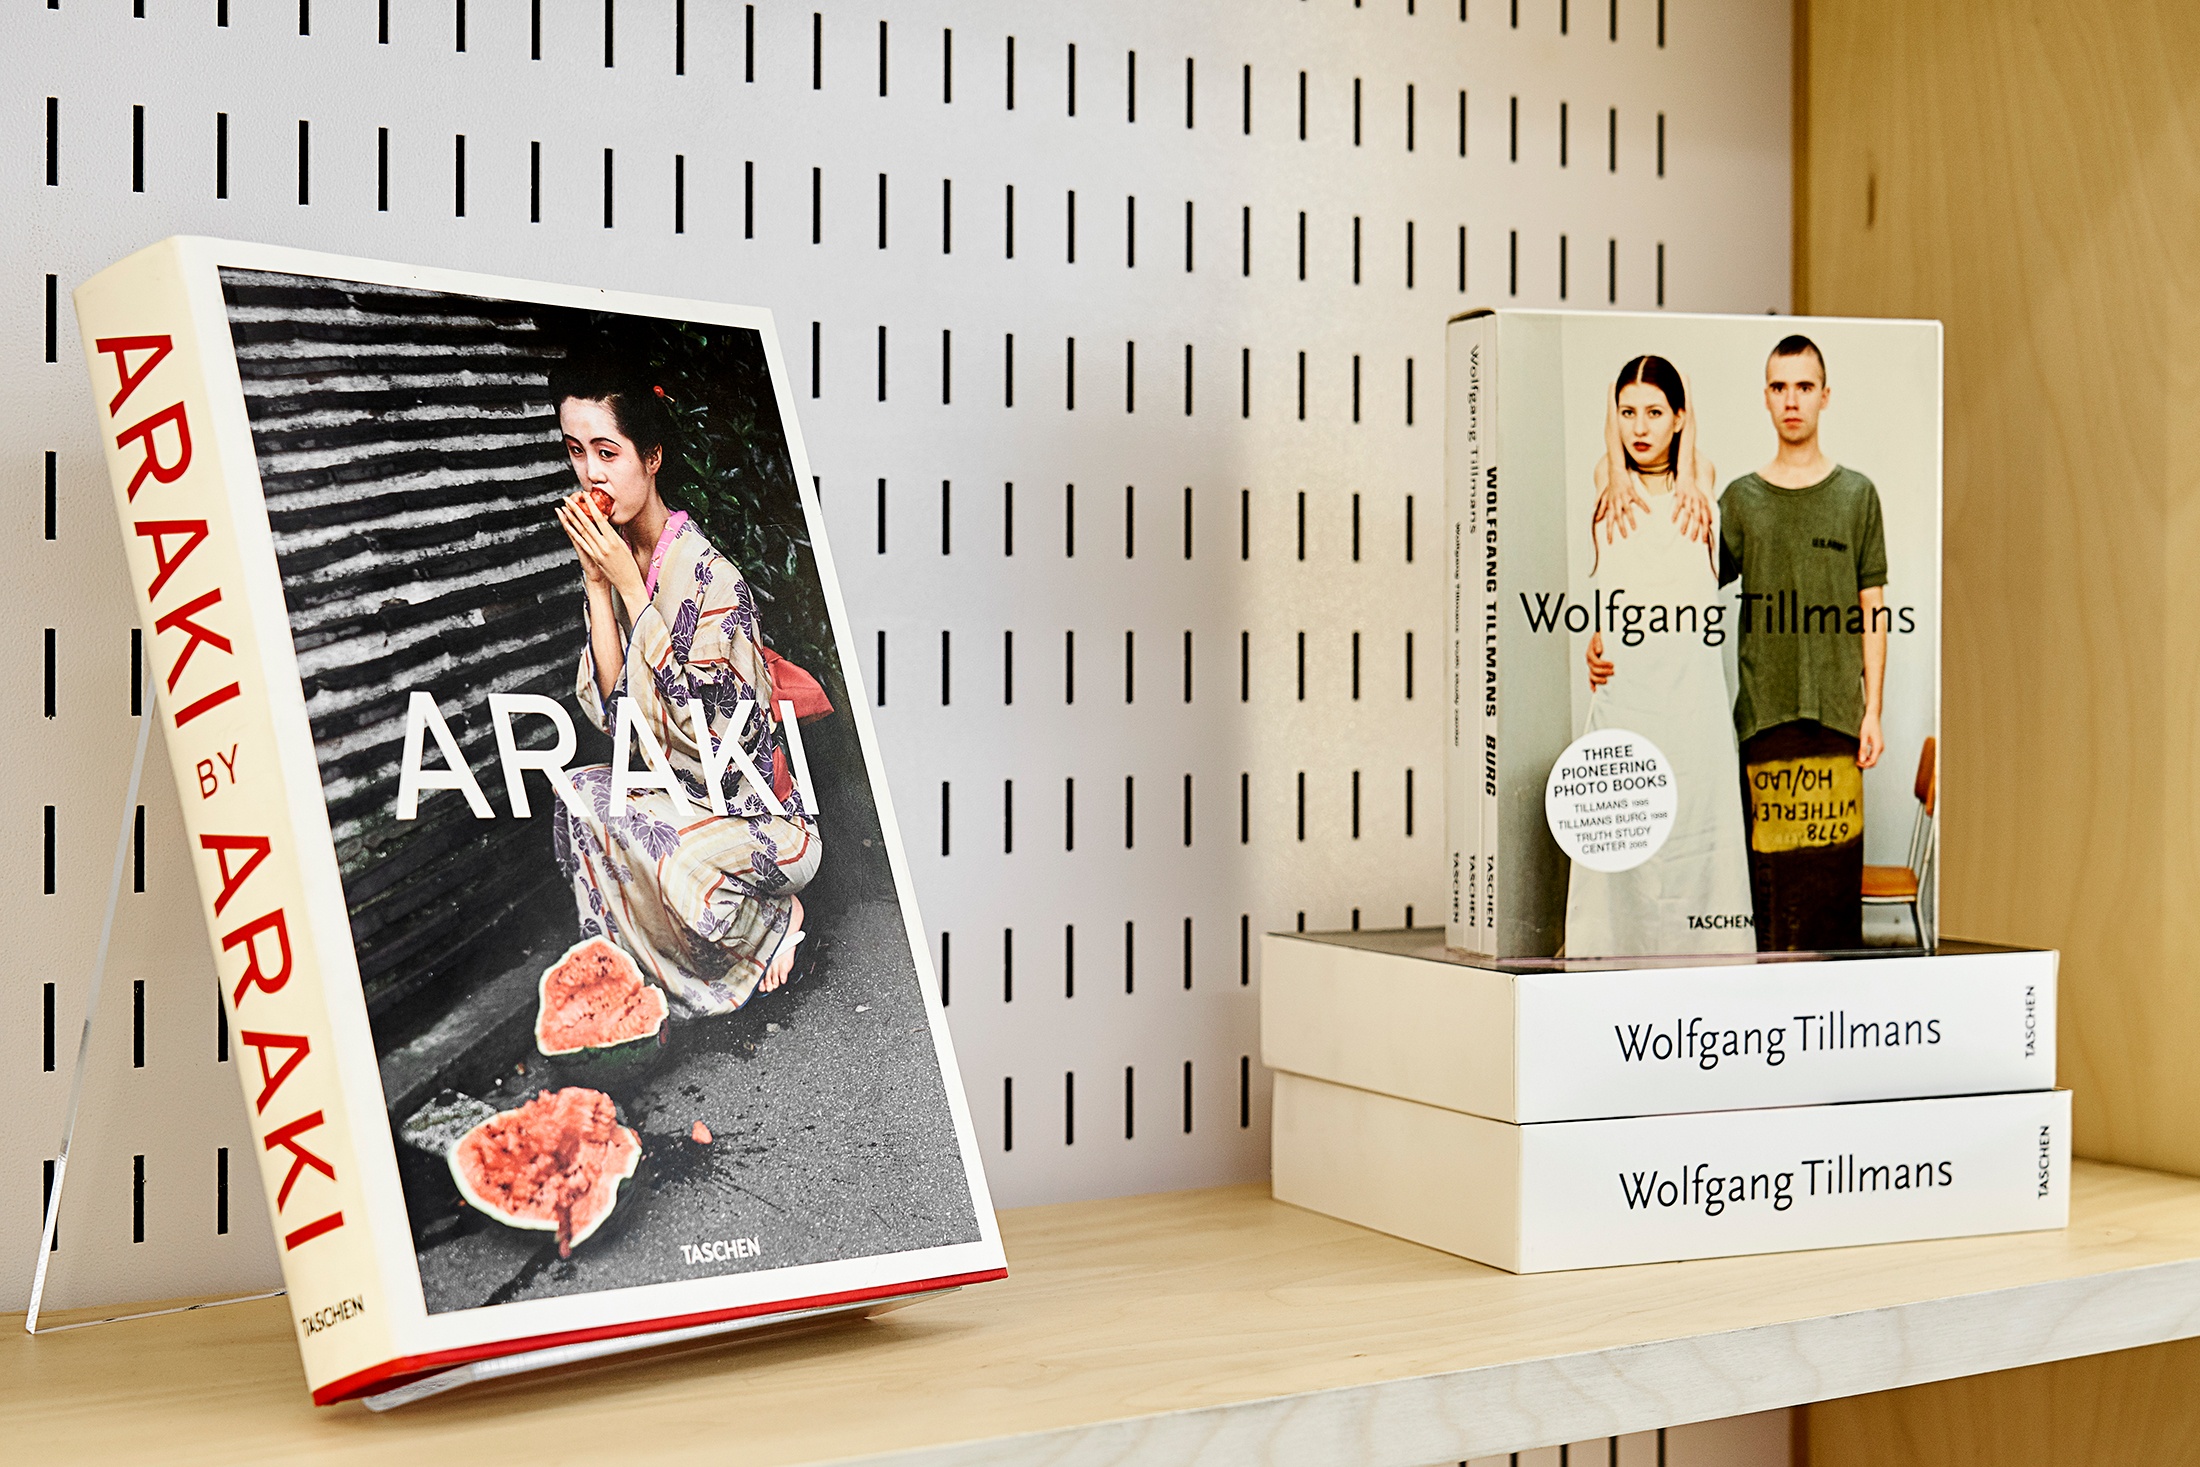 Installation photograph from the Taschen pop-up in A4’s Proto~ museum shop. A close-up view of a cabinet shelf showcases ‘Araki’ by Araki on the left, and a bundle of three photo books by Wolfgang Tillmans on the right.
